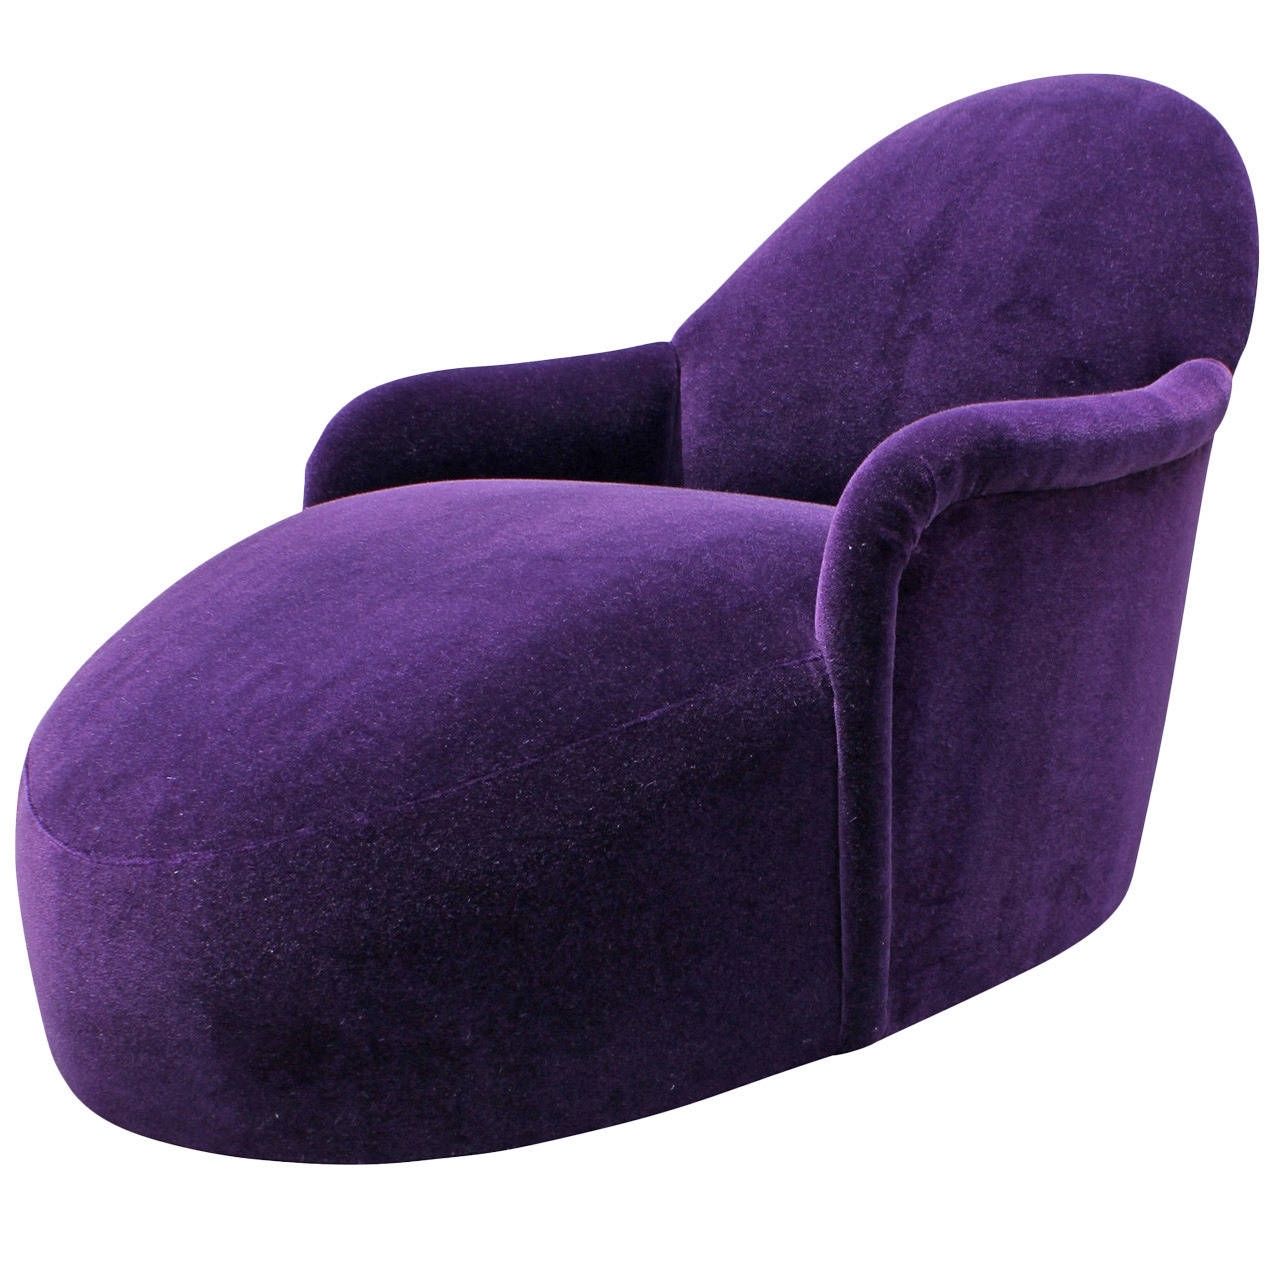 Purple Chaises Pertaining To Most Recent Incredible Milo Baughman Swivel Chaise In Purple Mohair Velvet (View 4 of 15)